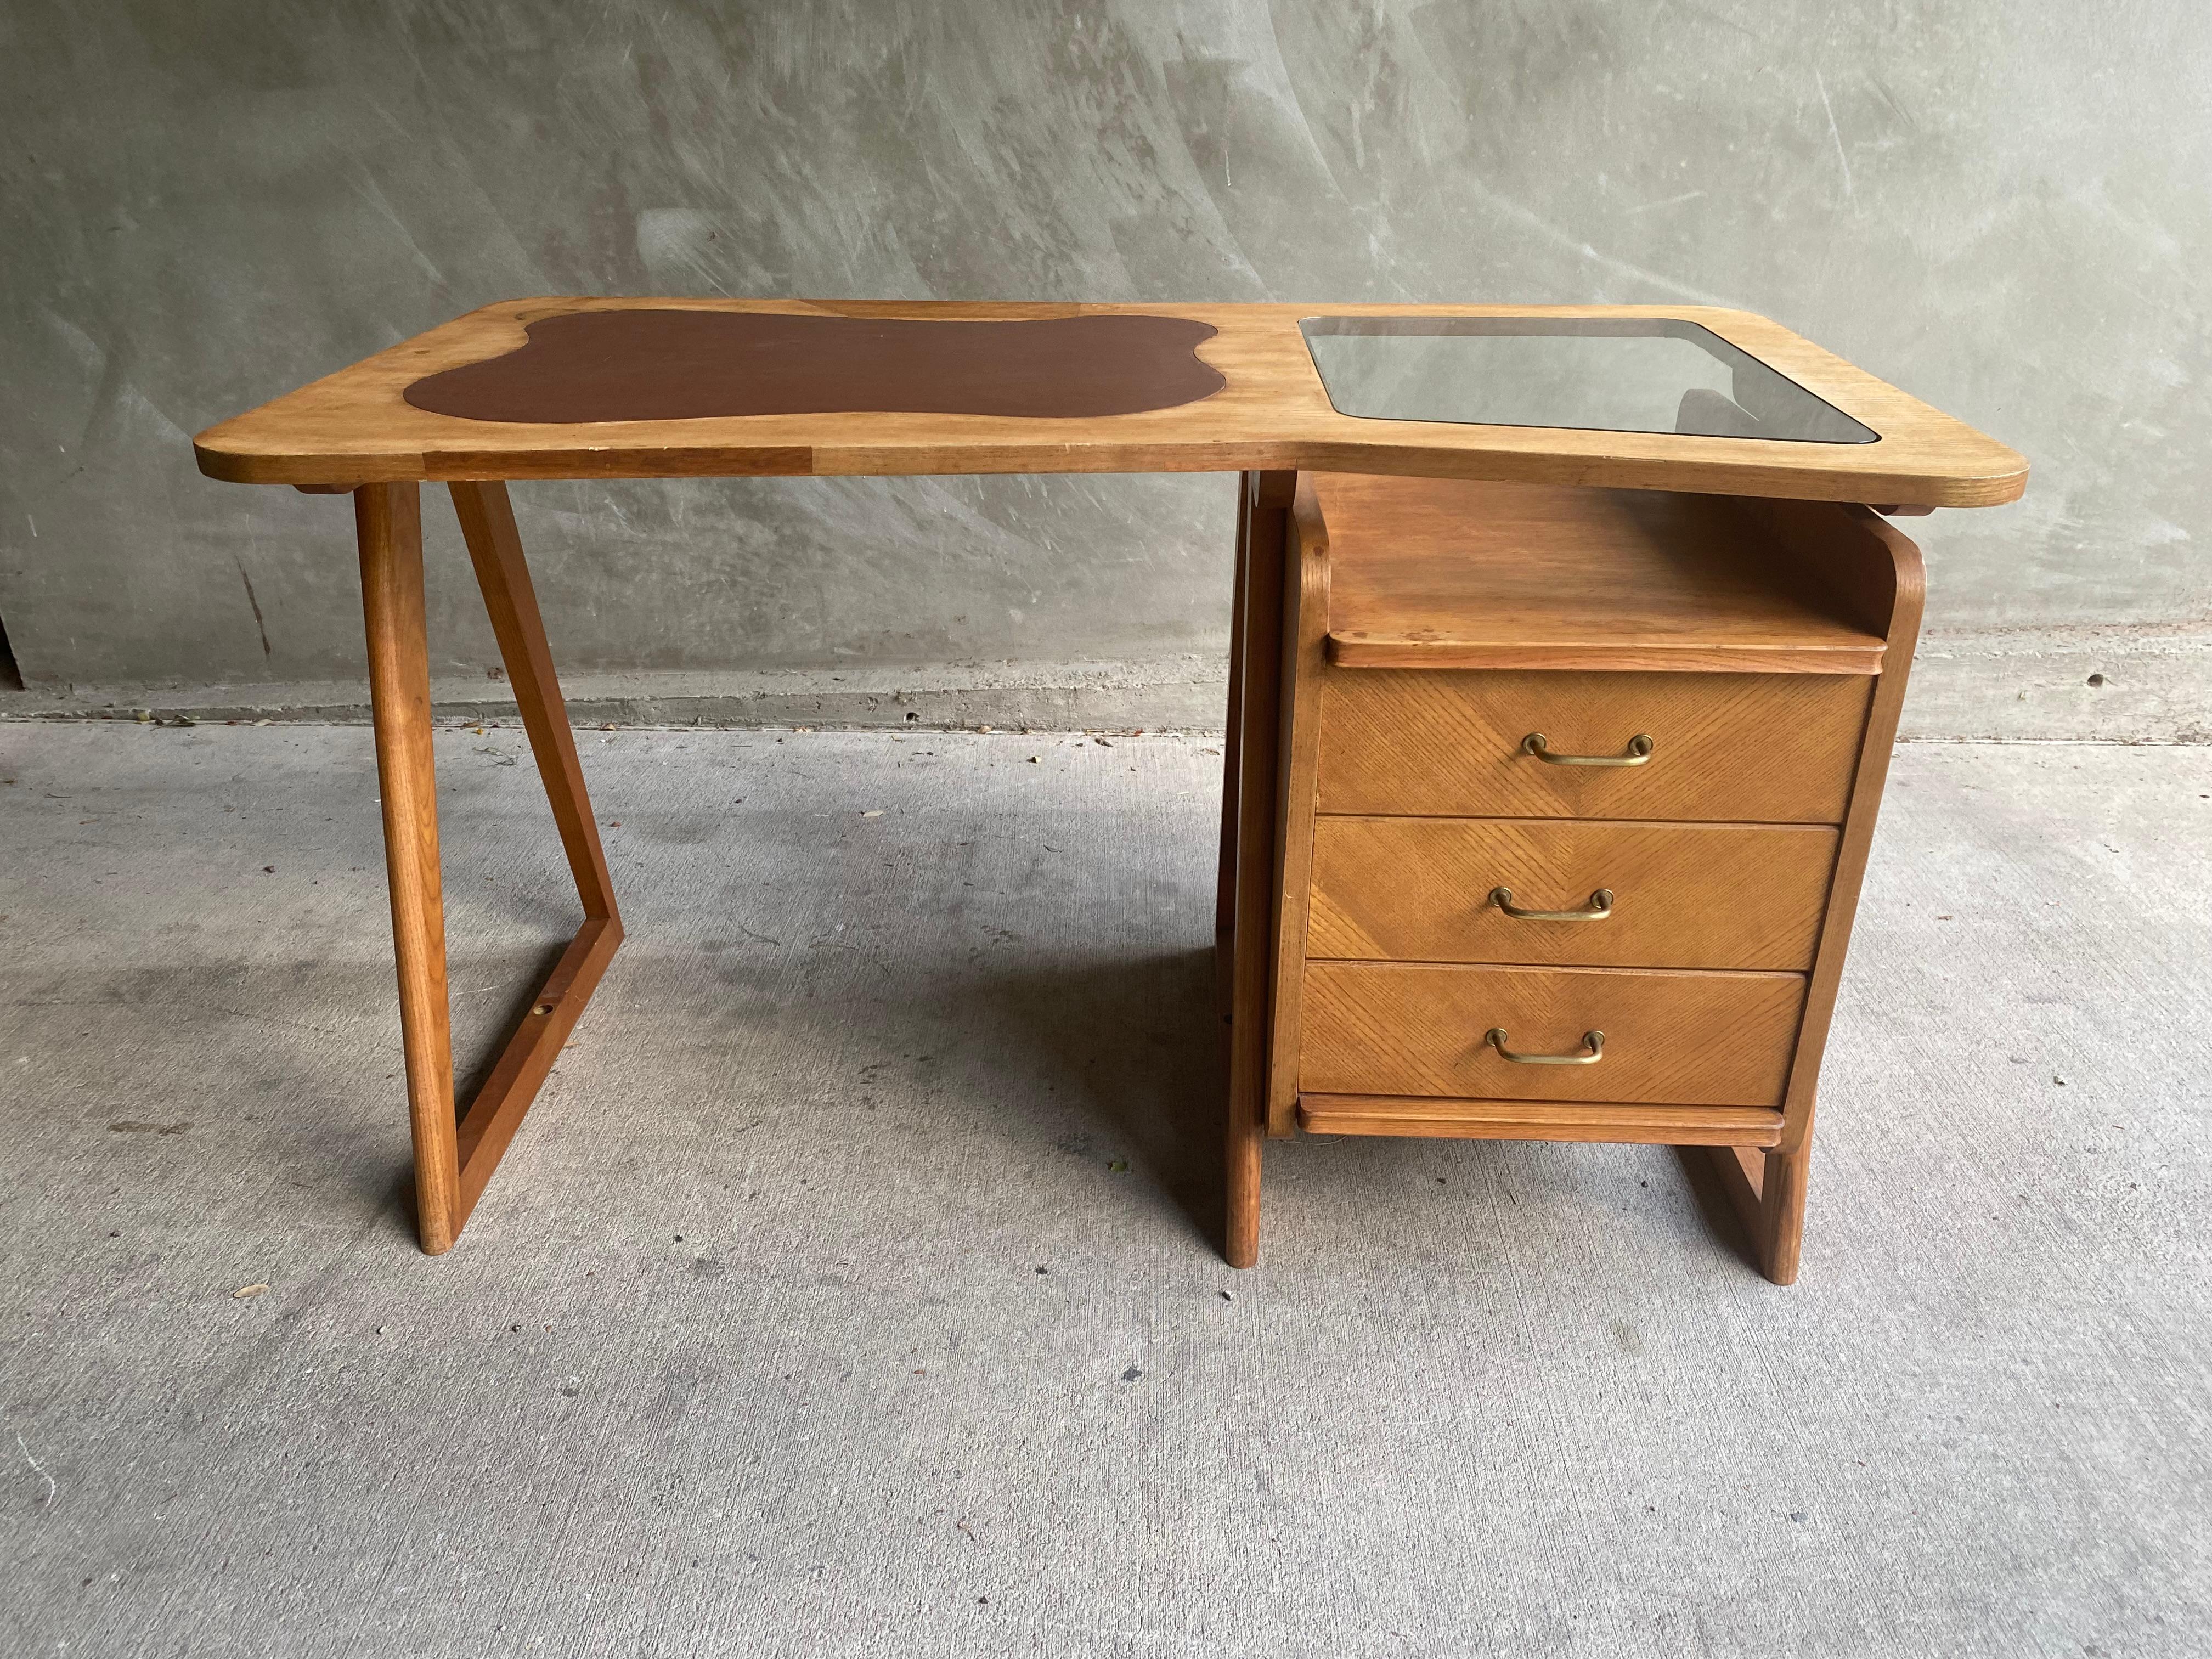 Mid-century oak desk with organic shaped top with inlaid glass and leather. Single stack of drawers and triangle legs. From same period, region and style as Guillerme et Chambron. France, 1950's